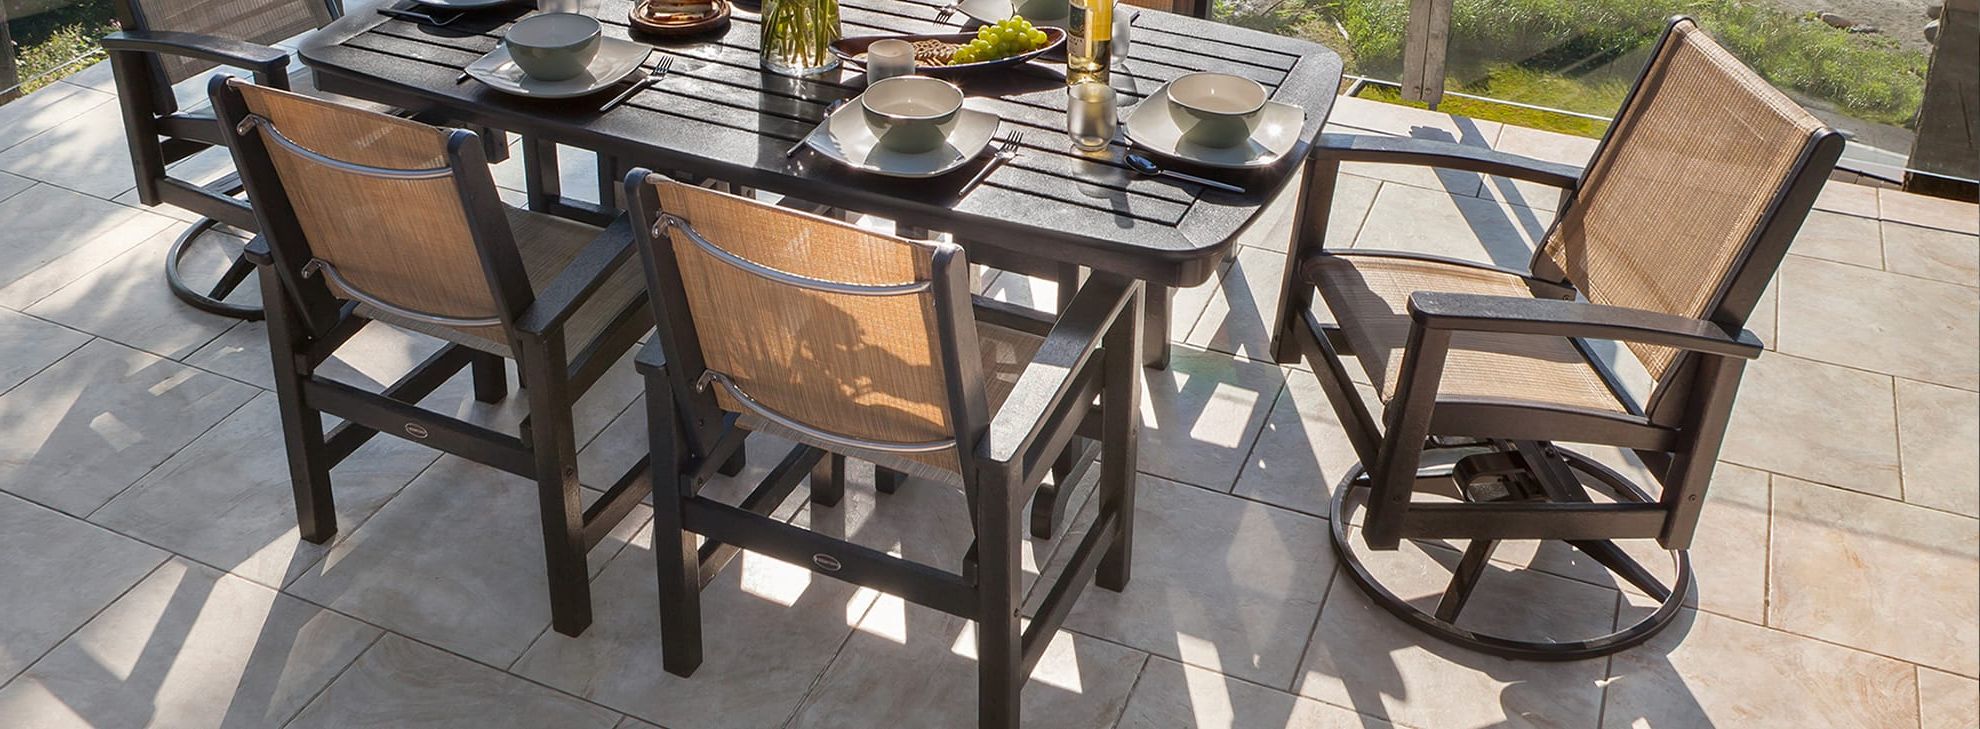 Swivel Outdoor Tables Regarding Most Up To Date Outdoor Swivel Chairs – Polywood® (View 8 of 15)